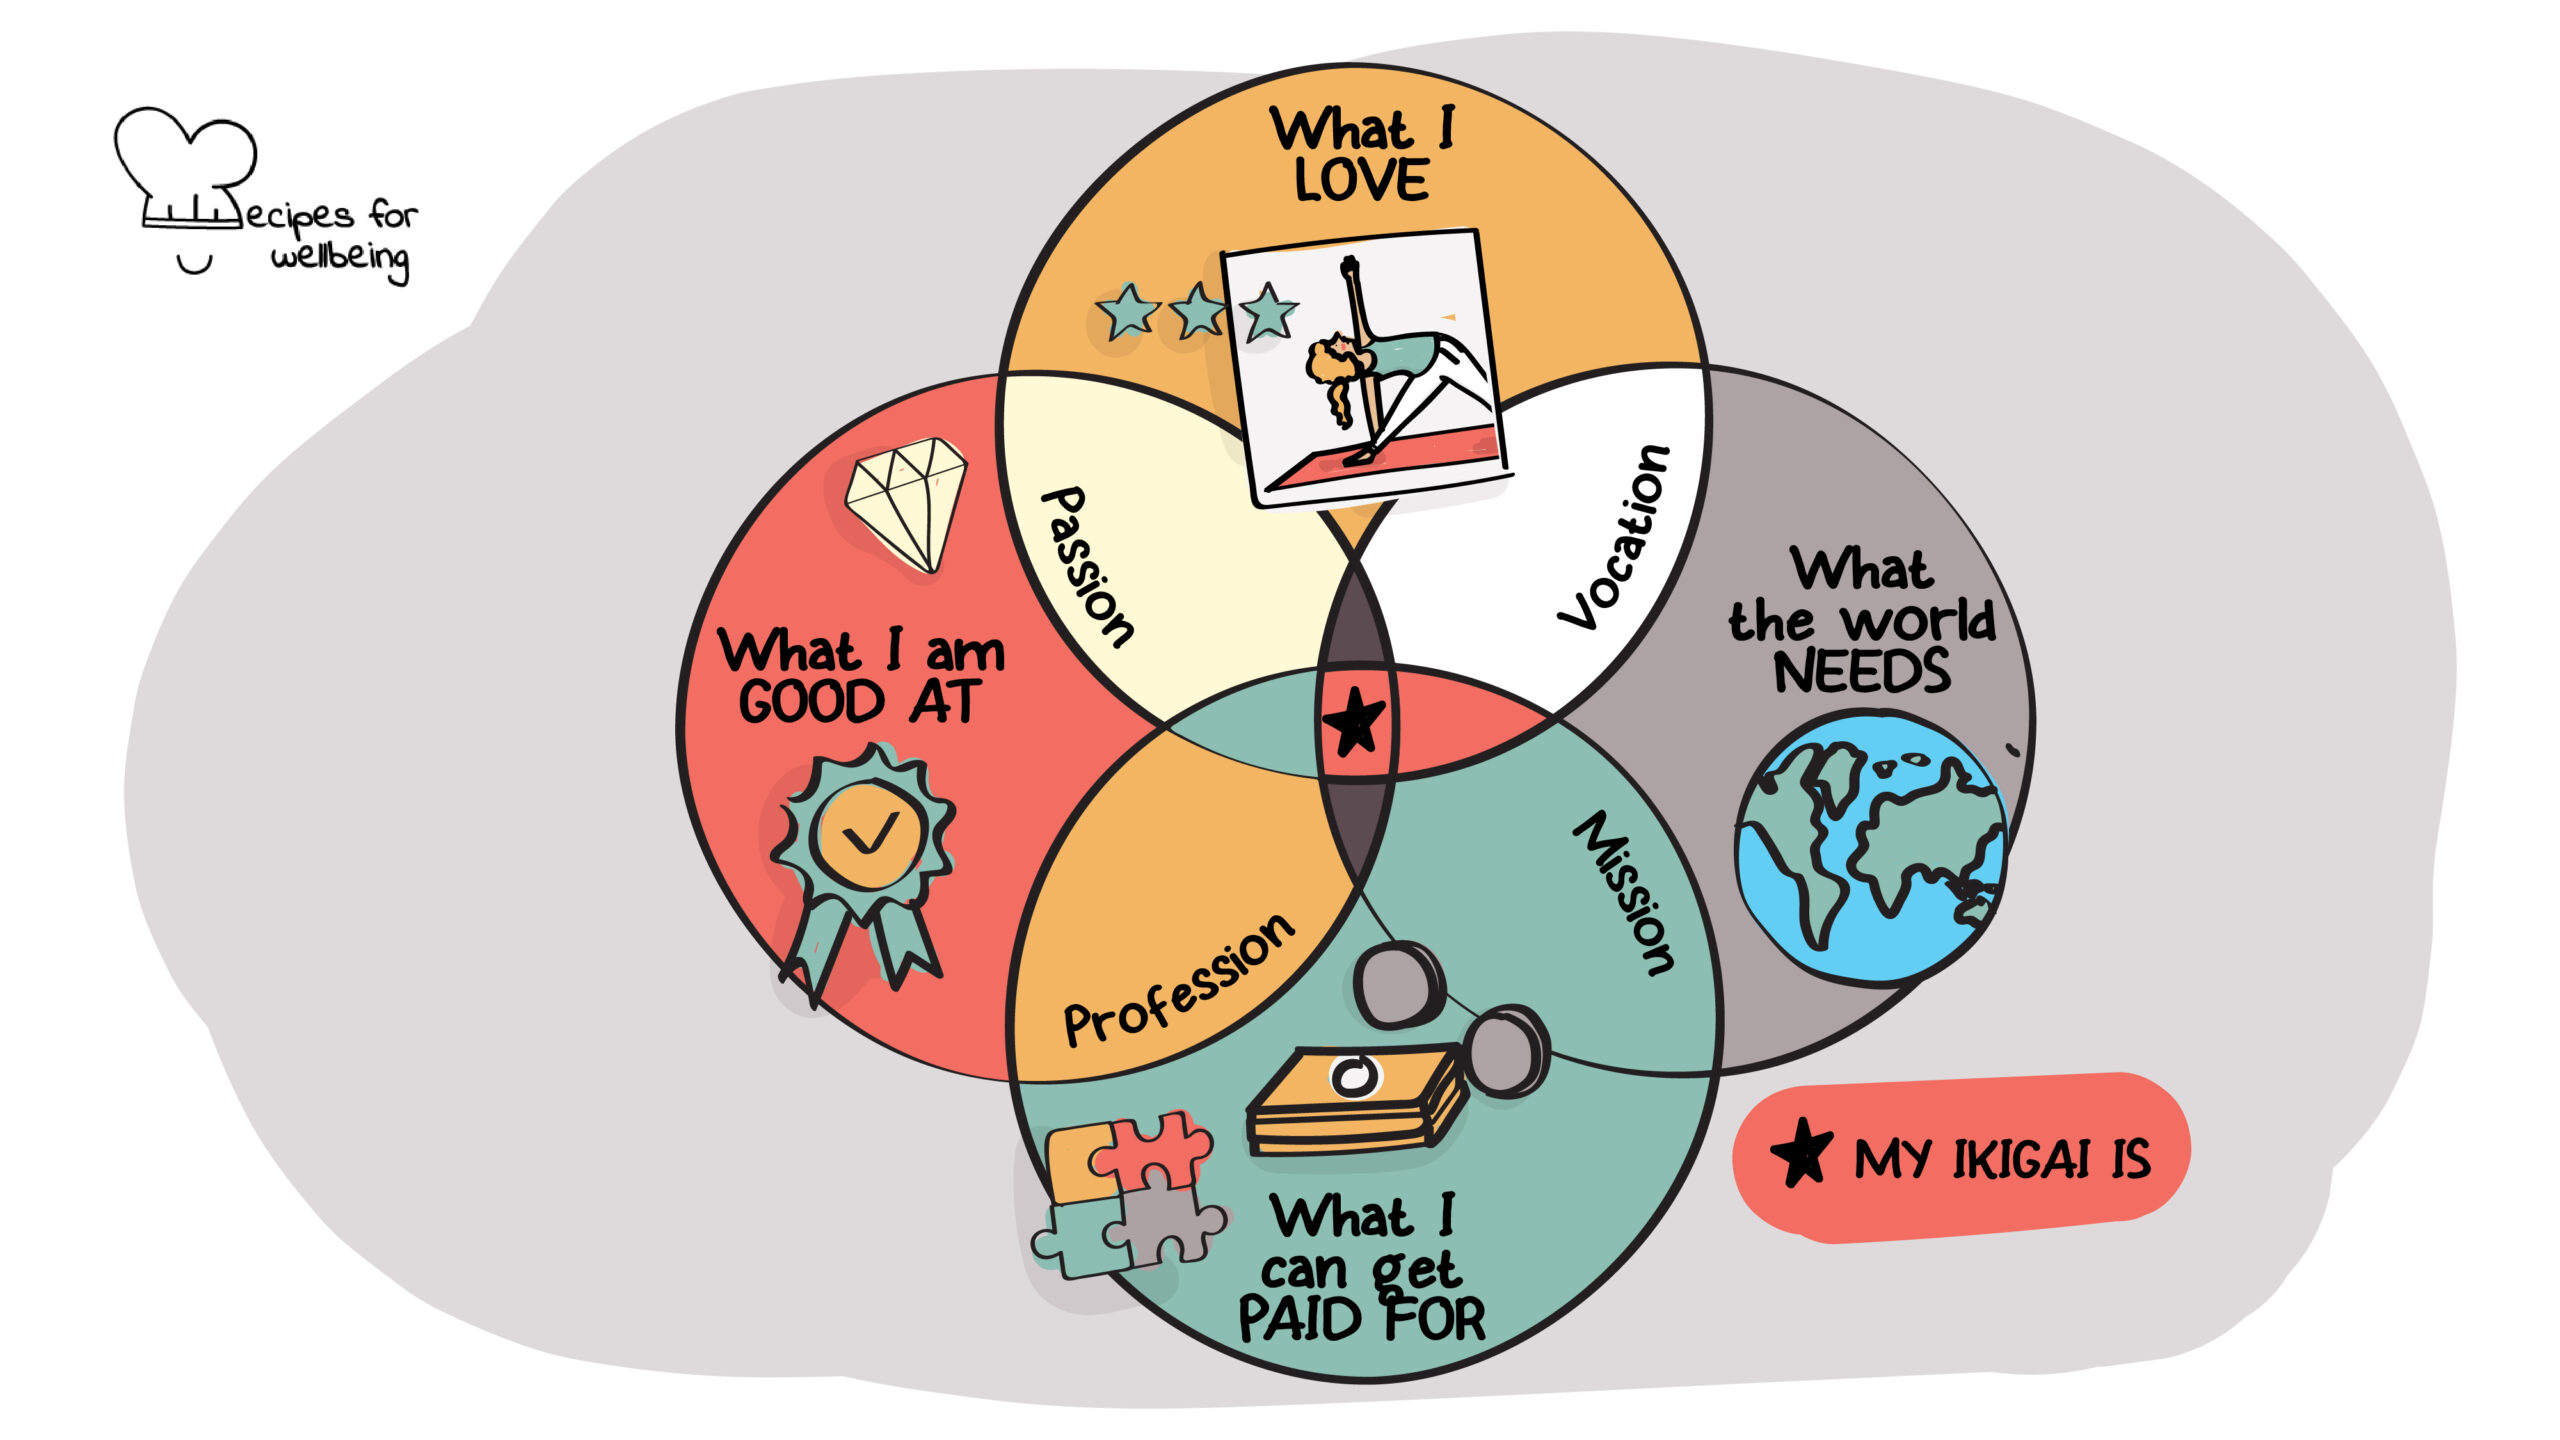 Illustration of the Ikigai diagram with 4 overlapping circles representing "What I love", "What I am good at", "What I can get paid for", and "What the world needs". © Recipes for Wellbeing